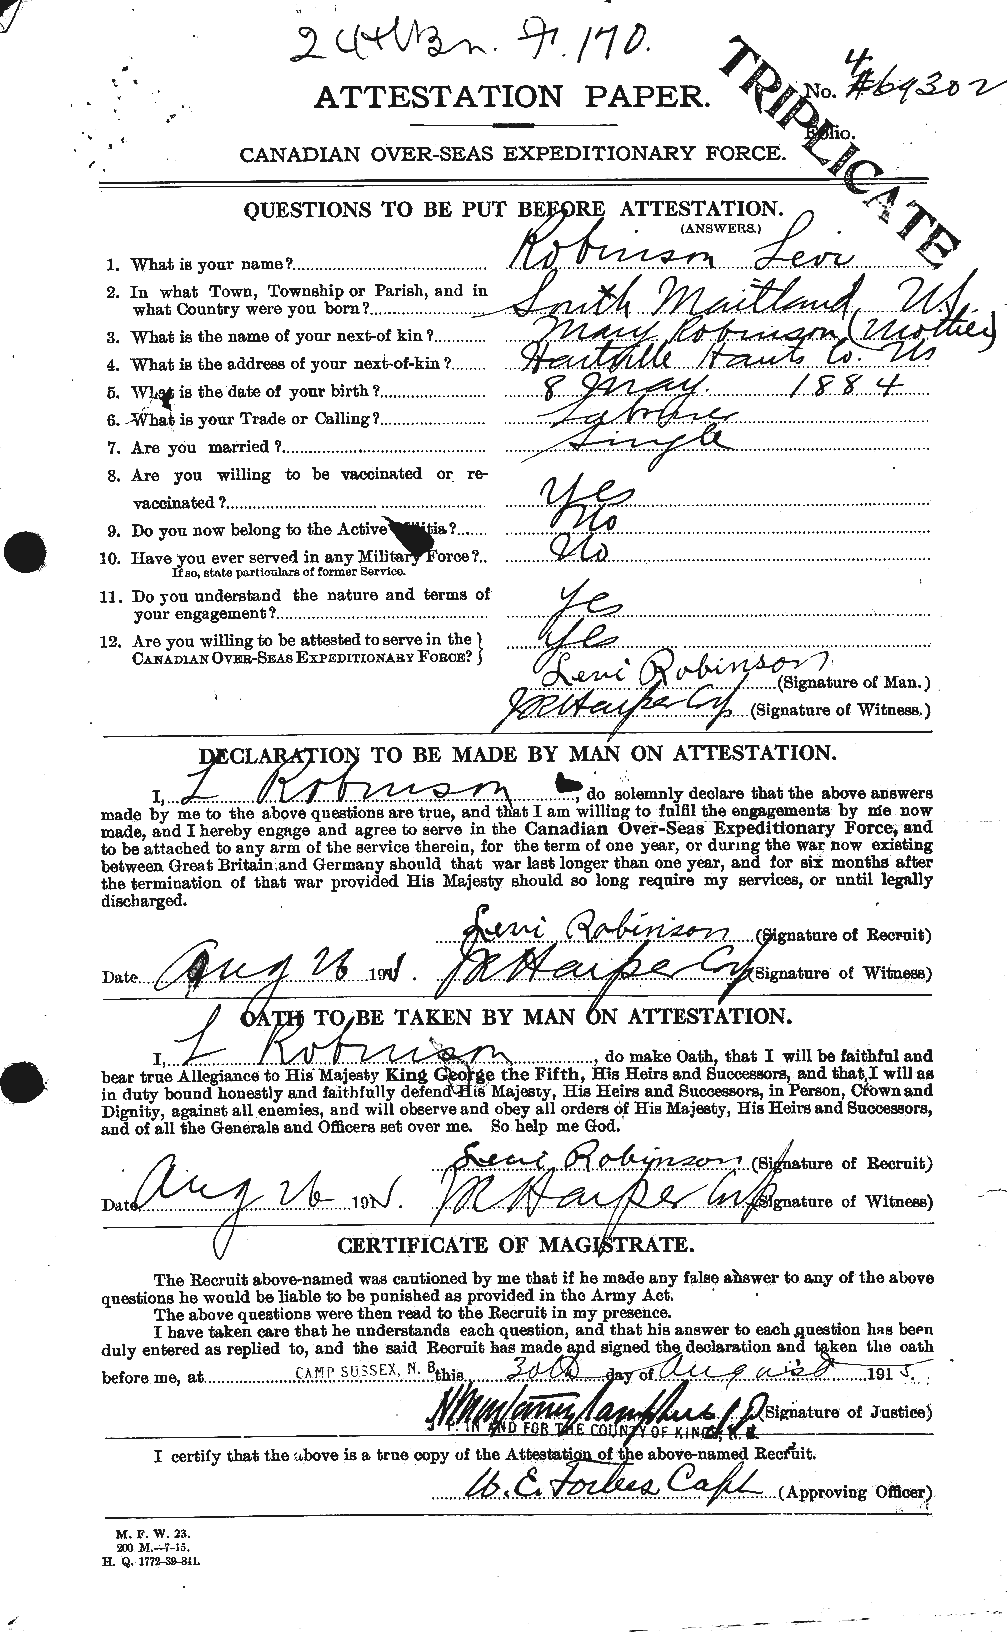 Personnel Records of the First World War - CEF 611654a